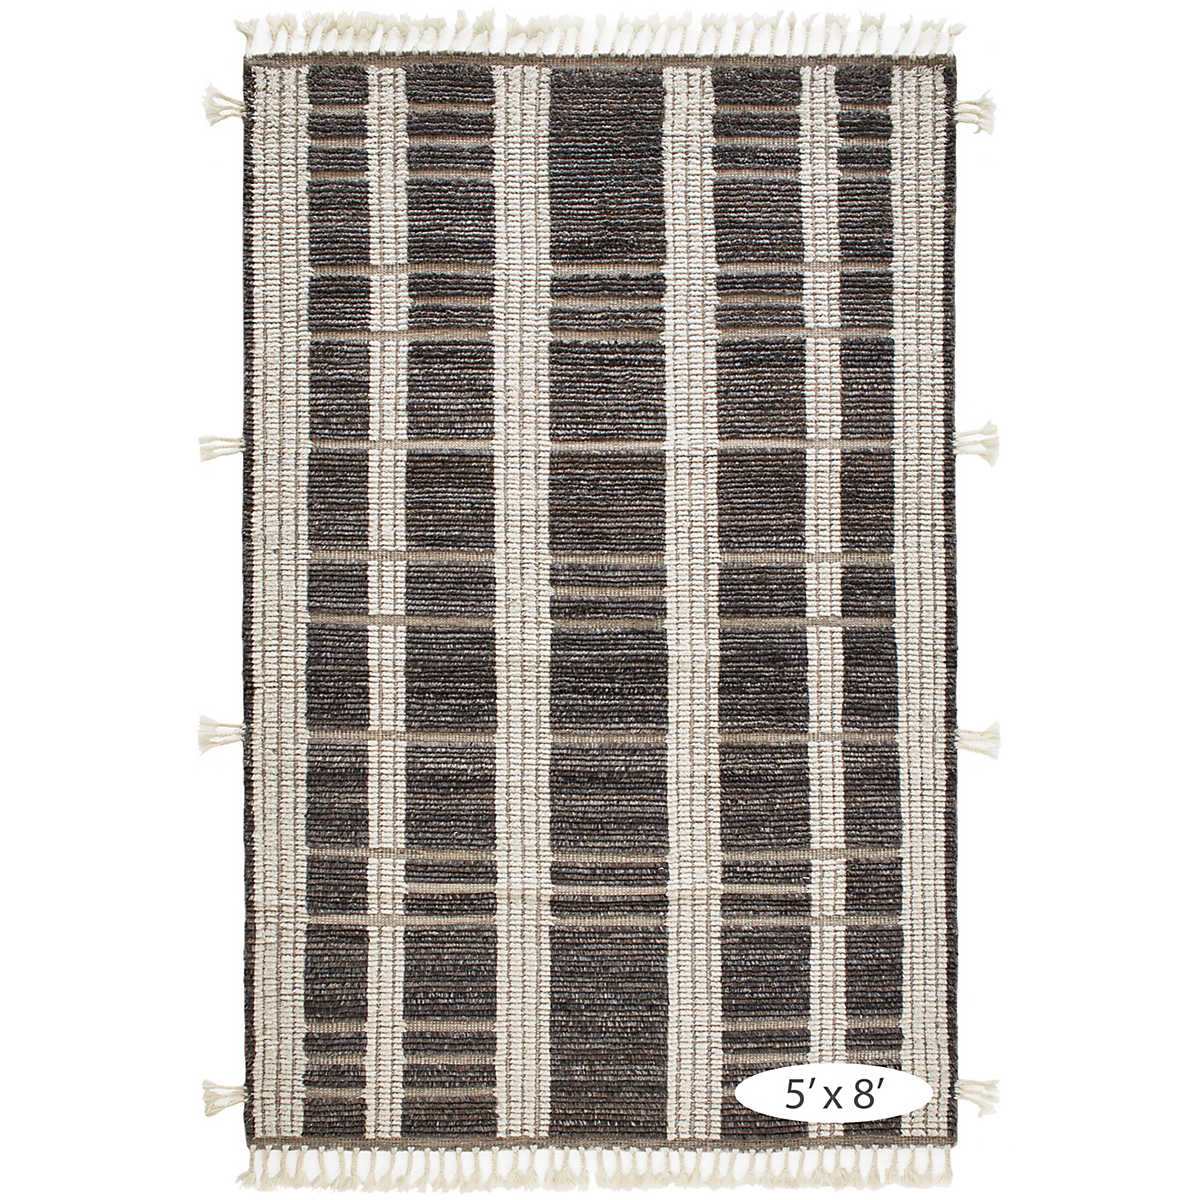 The Tory Grey/Ivory Rug stripes of Ivory fleece alternate with raised bands of naturally colored, mélange Charcoal wool. Interspersed by low-profile, woven taupe boundaries that bring rhythm to the textural blocks. Length sides are lightened with funky, bohemian braided tassels that add whimsy. Amethyst Home provides interior design services, furniture, rugs, and lighting in the Des Moines metro area.